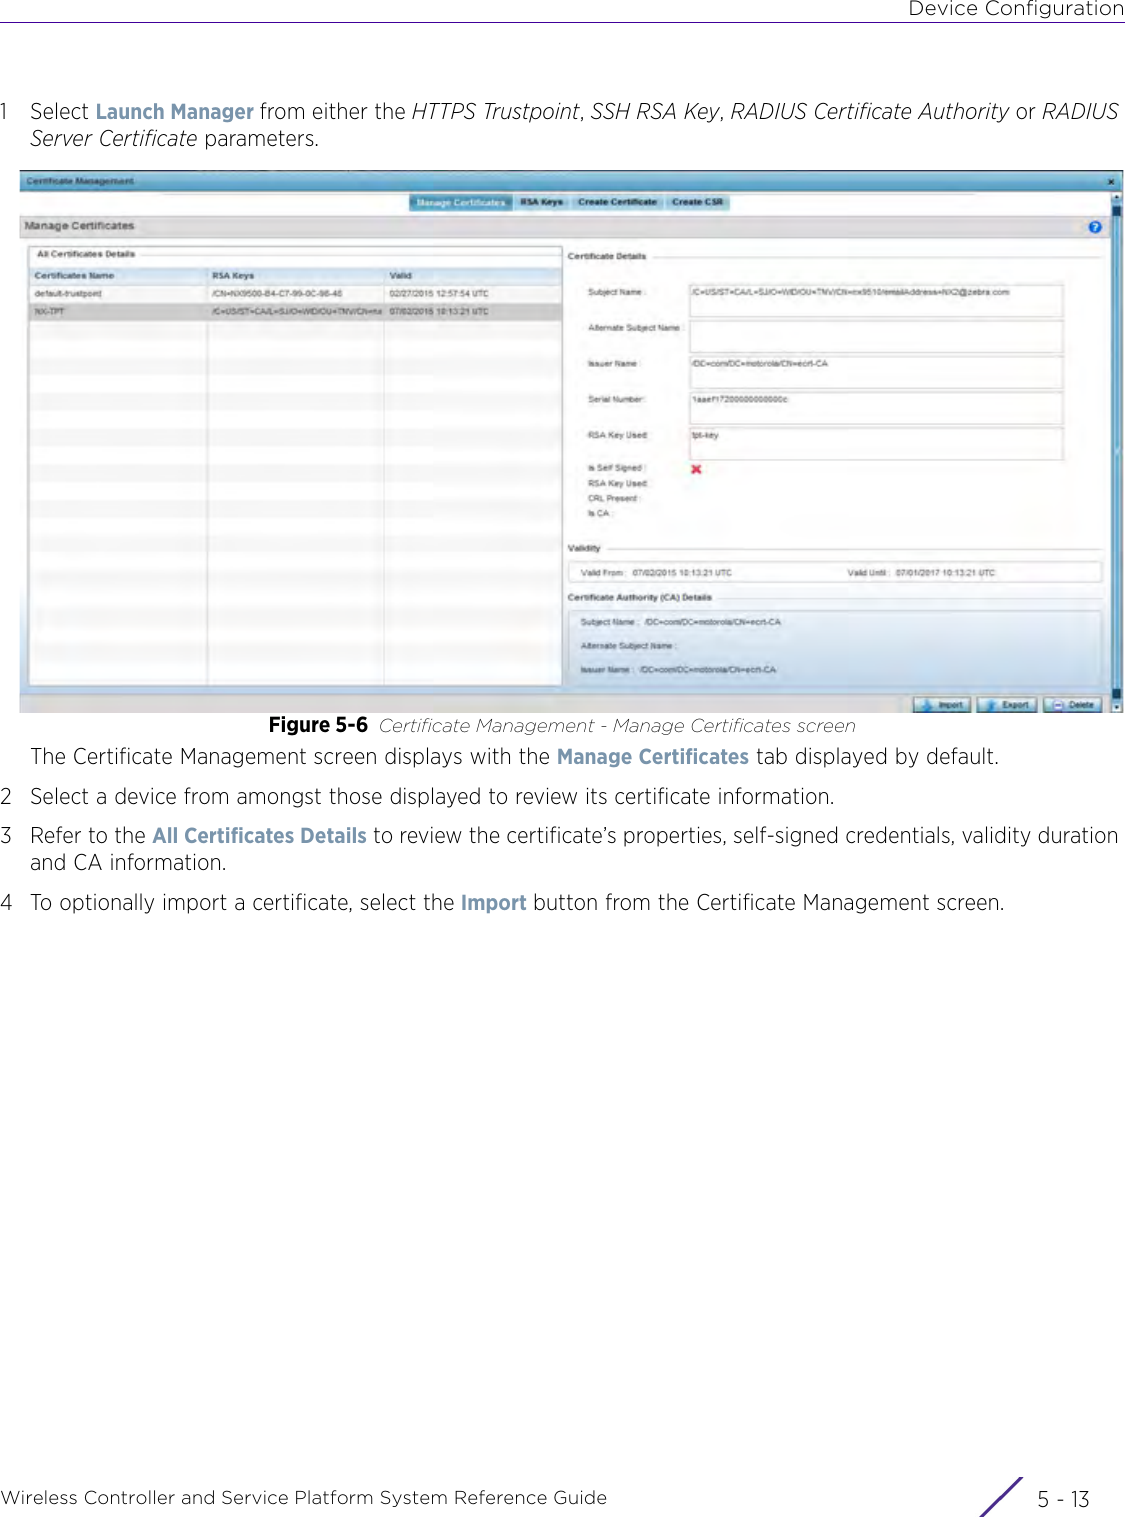 Device ConfigurationWireless Controller and Service Platform System Reference Guide 5 - 131Select Launch Manager from either the HTTPS Trustpoint, SSH RSA Key, RADIUS Certificate Authority or RADIUS Server Certificate parameters.Figure 5-6 Certificate Management - Manage Certificates screenThe Certificate Management screen displays with the Manage Certificates tab displayed by default. 2 Select a device from amongst those displayed to review its certificate information. 3 Refer to the All Certificates Details to review the certificate’s properties, self-signed credentials, validity duration and CA information. 4 To optionally import a certificate, select the Import button from the Certificate Management screen.